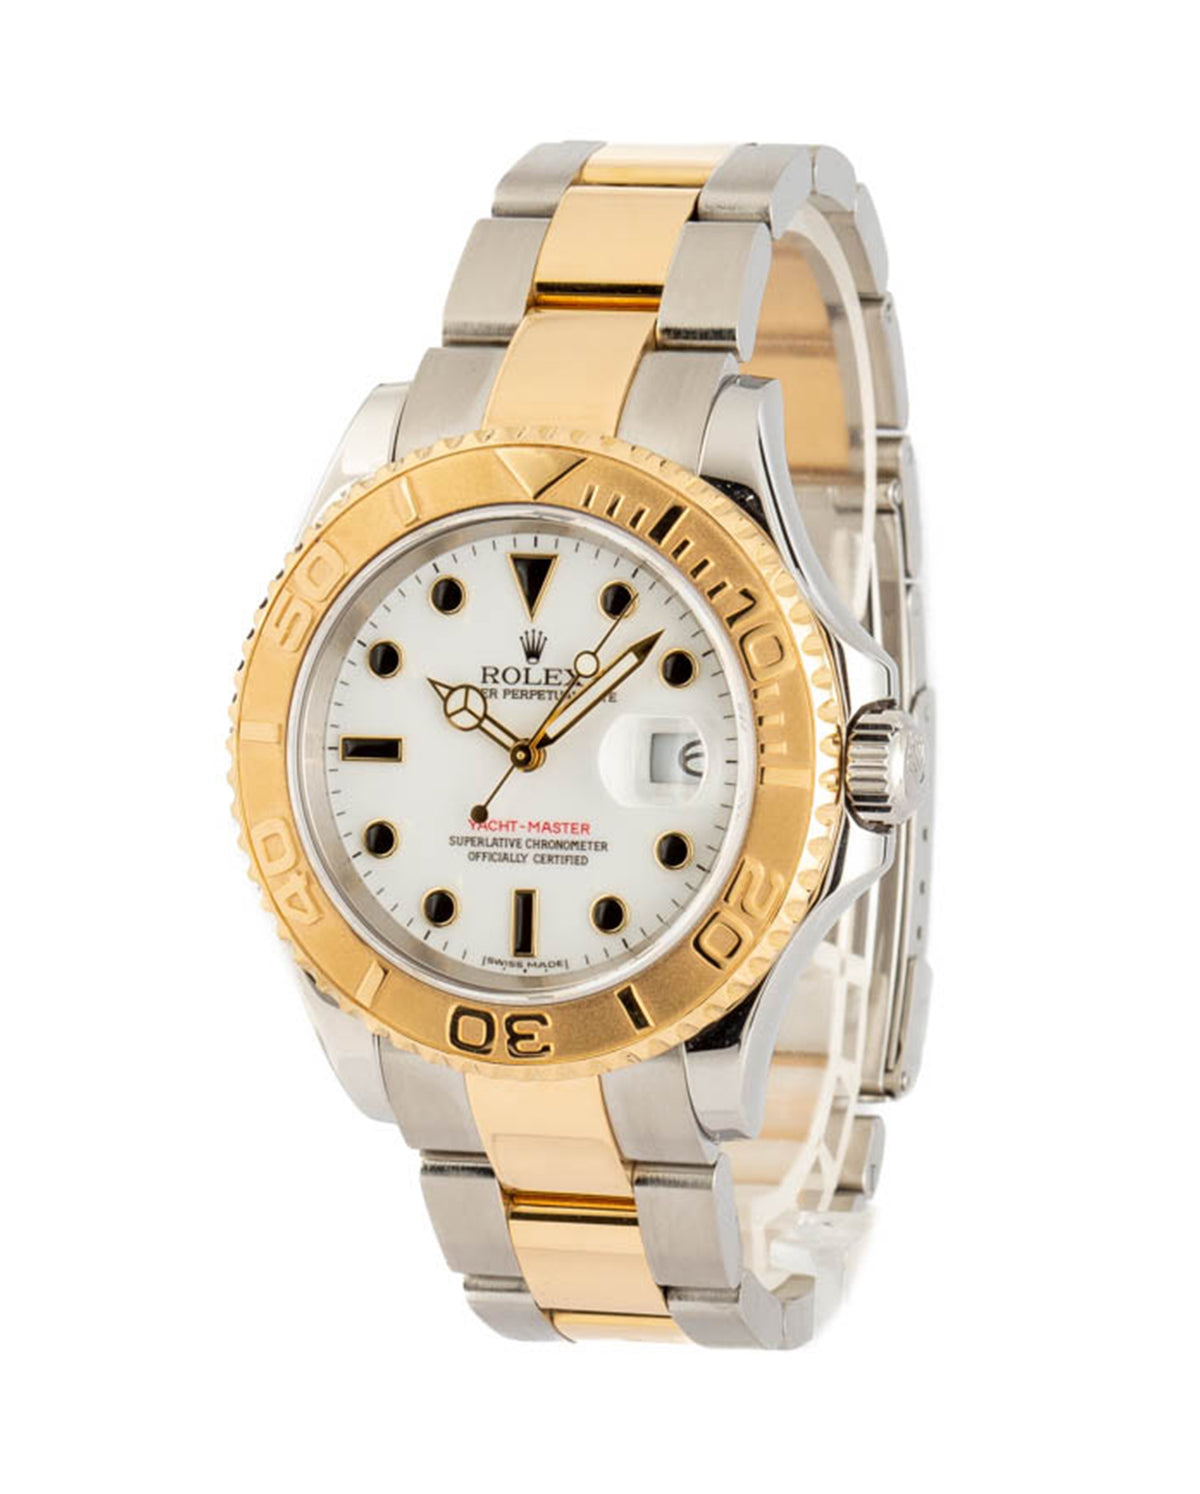 Rolex Yachtmaster Yellow Gold/Stainless Steel